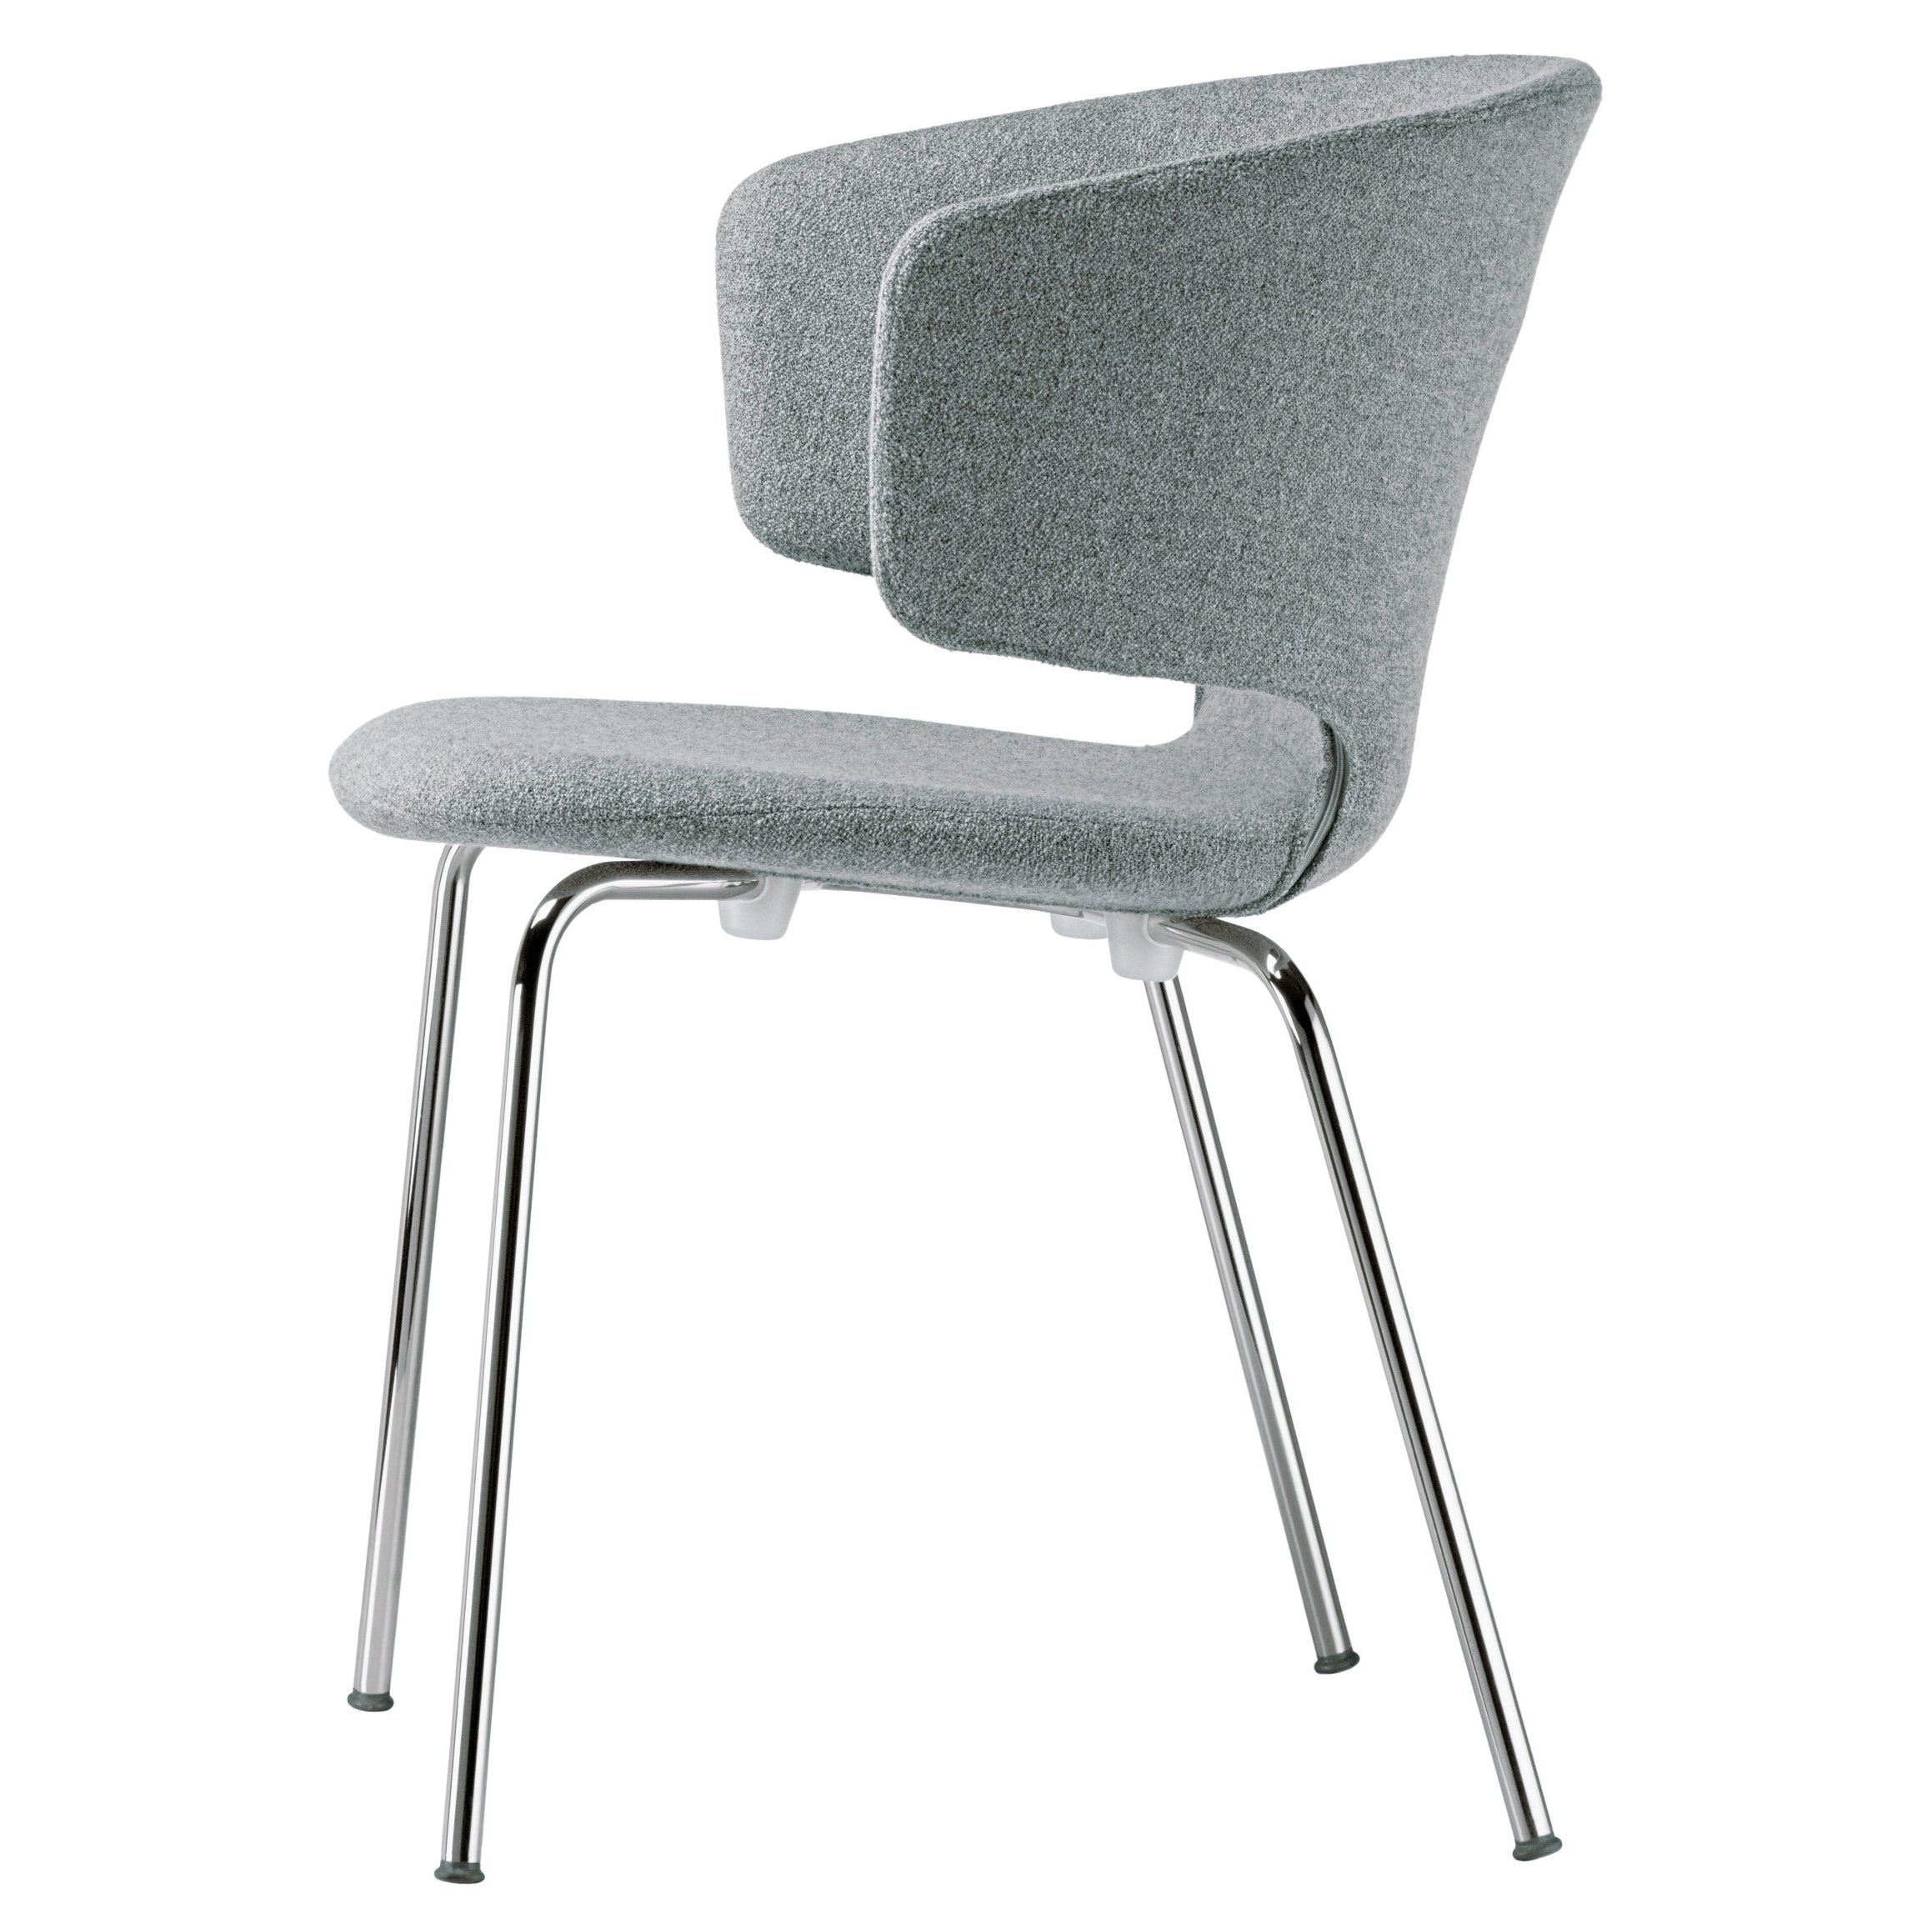 Alias 503 Taormina Chair in Gray Seat and Chromed Steel Frame by Alfredo Häberli For Sale